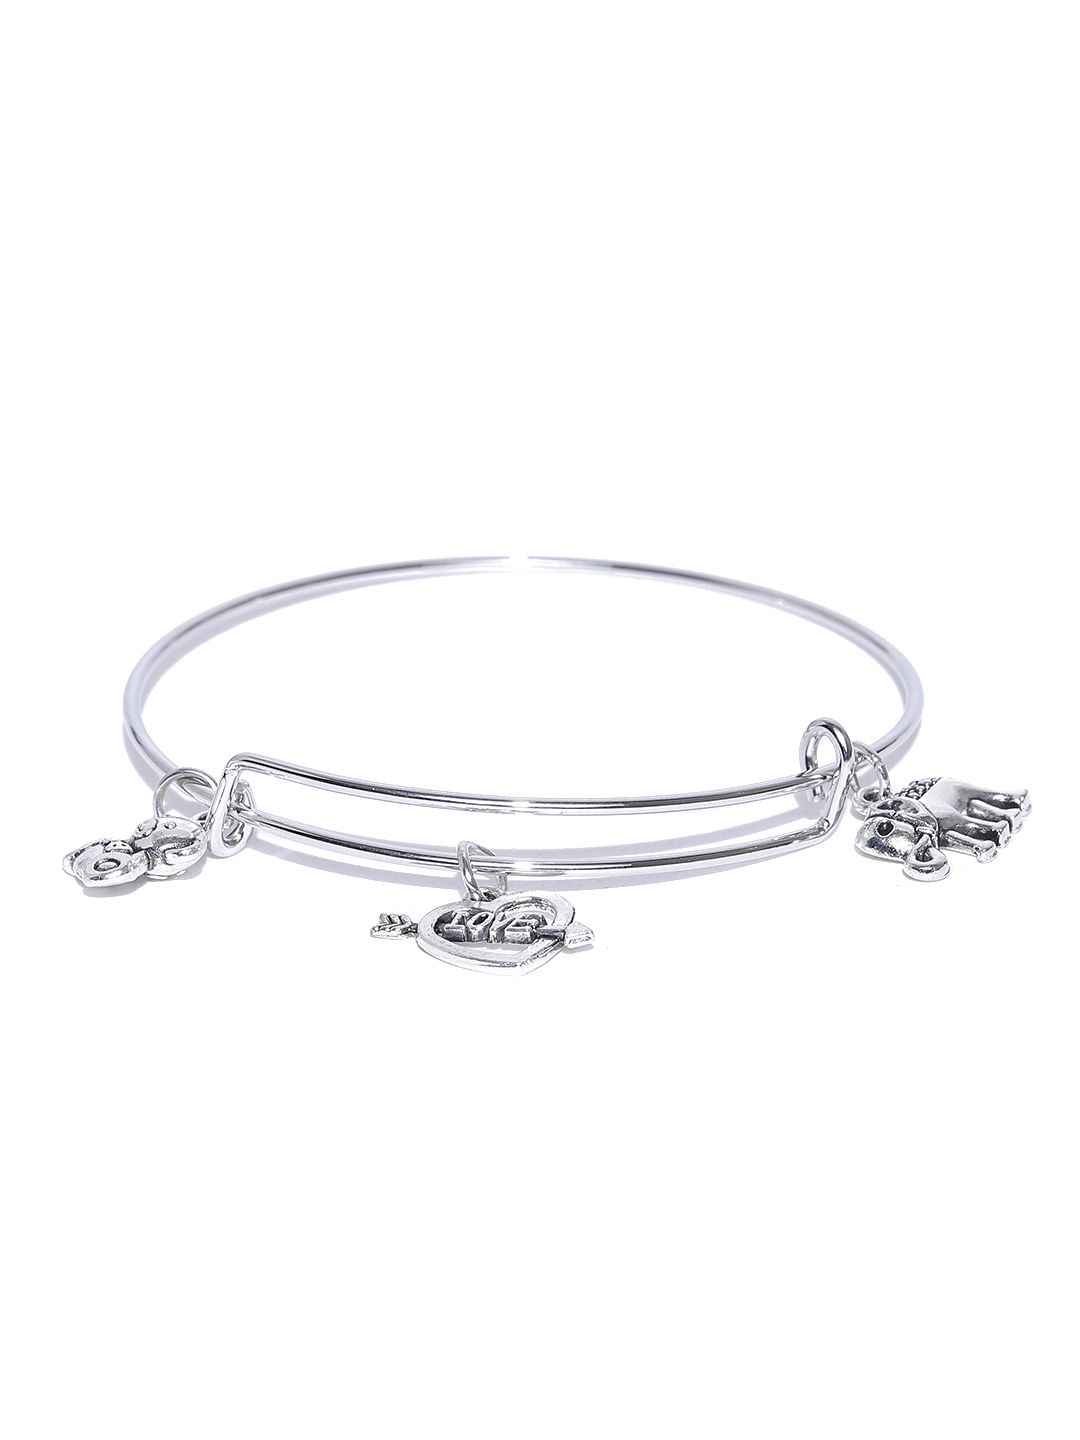 YouBella Oxidised Silver-Toned Charm Bracelet Price in India